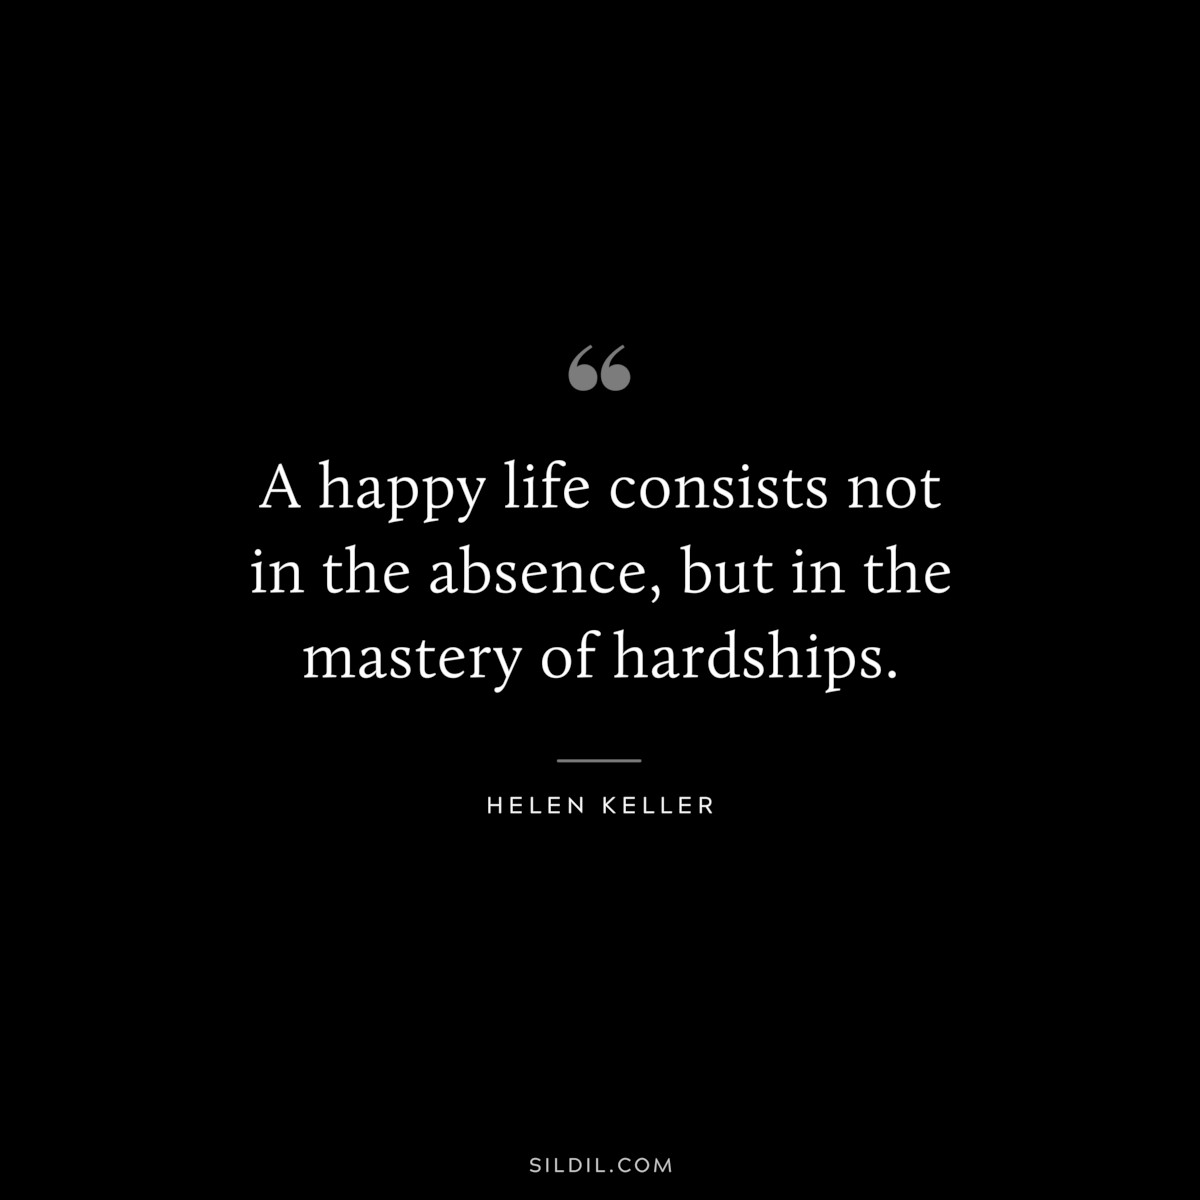 A happy life consists not in the absence, but in the mastery of hardships. ― Helen Keller